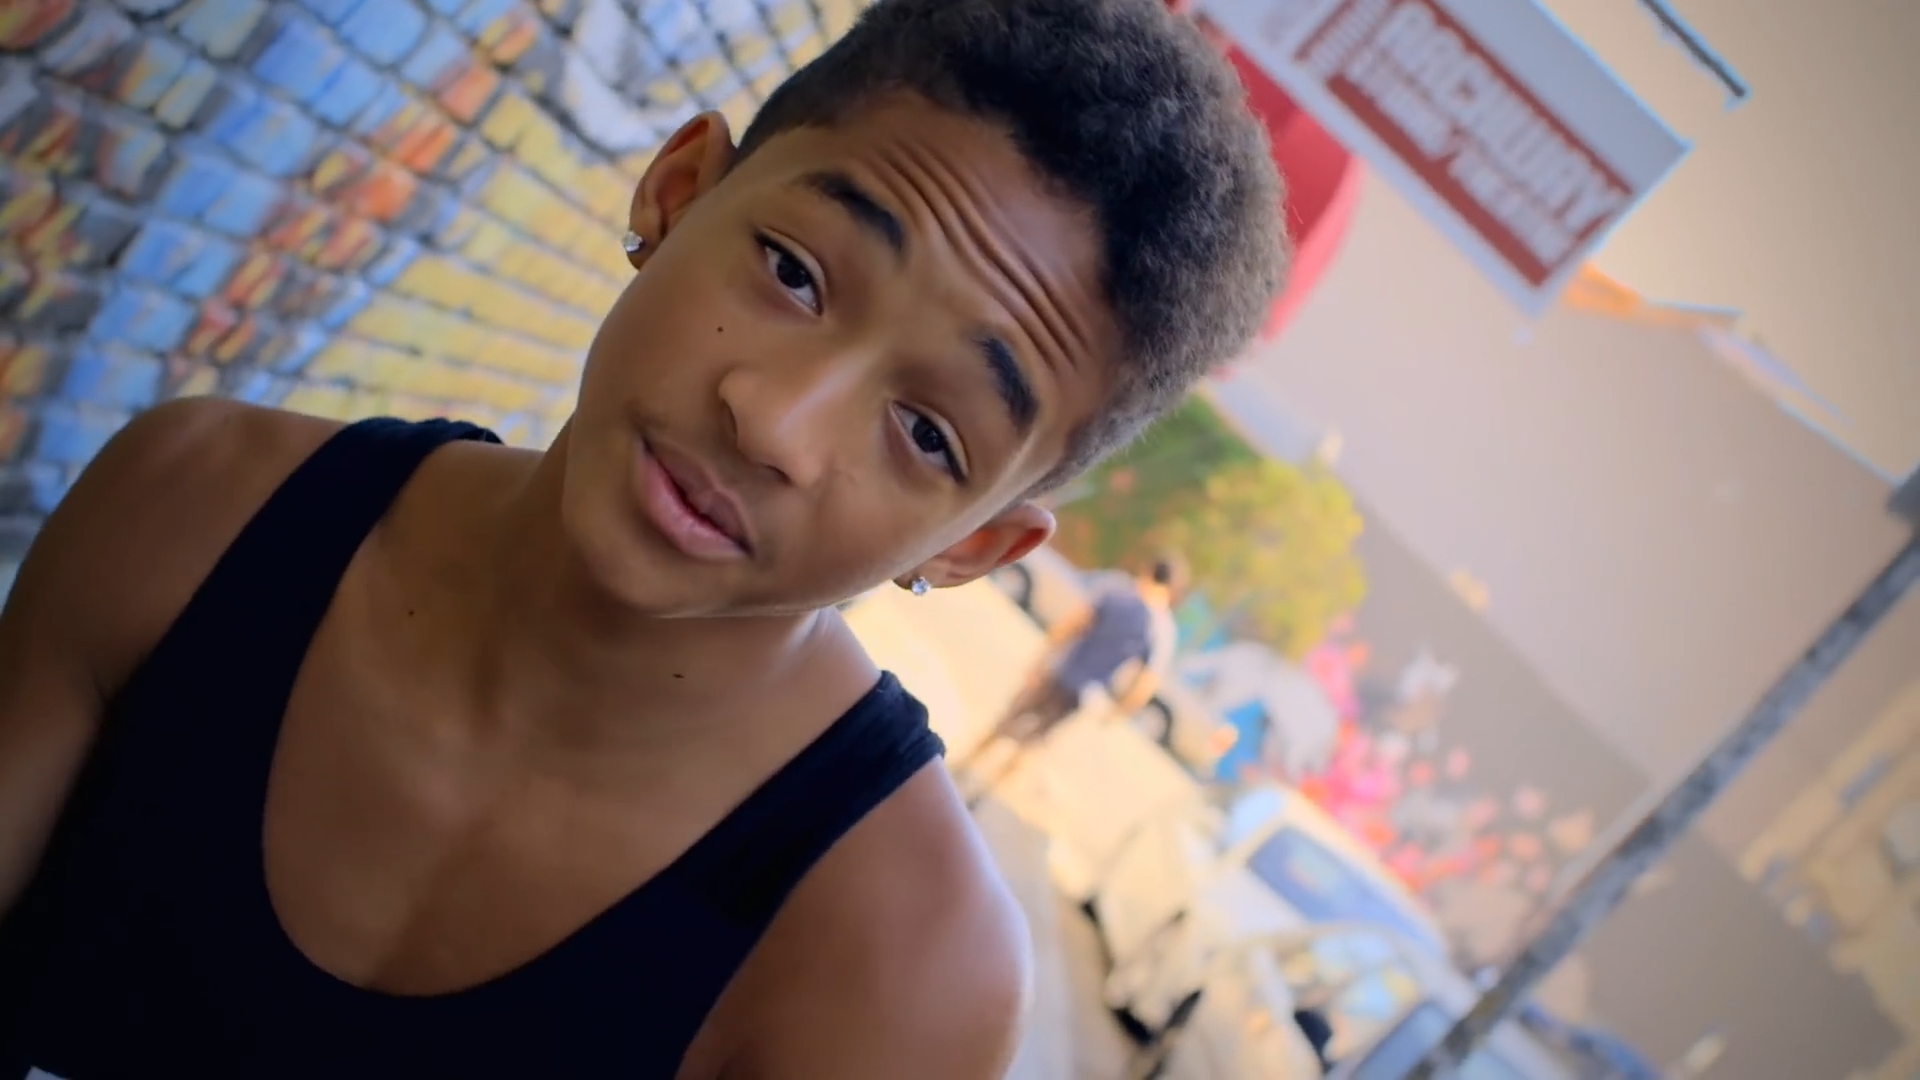 Picture Of Jaden Smith In Music Video The Coolest Jaden Smith 1643333352 Teen Idols 4 You 3171